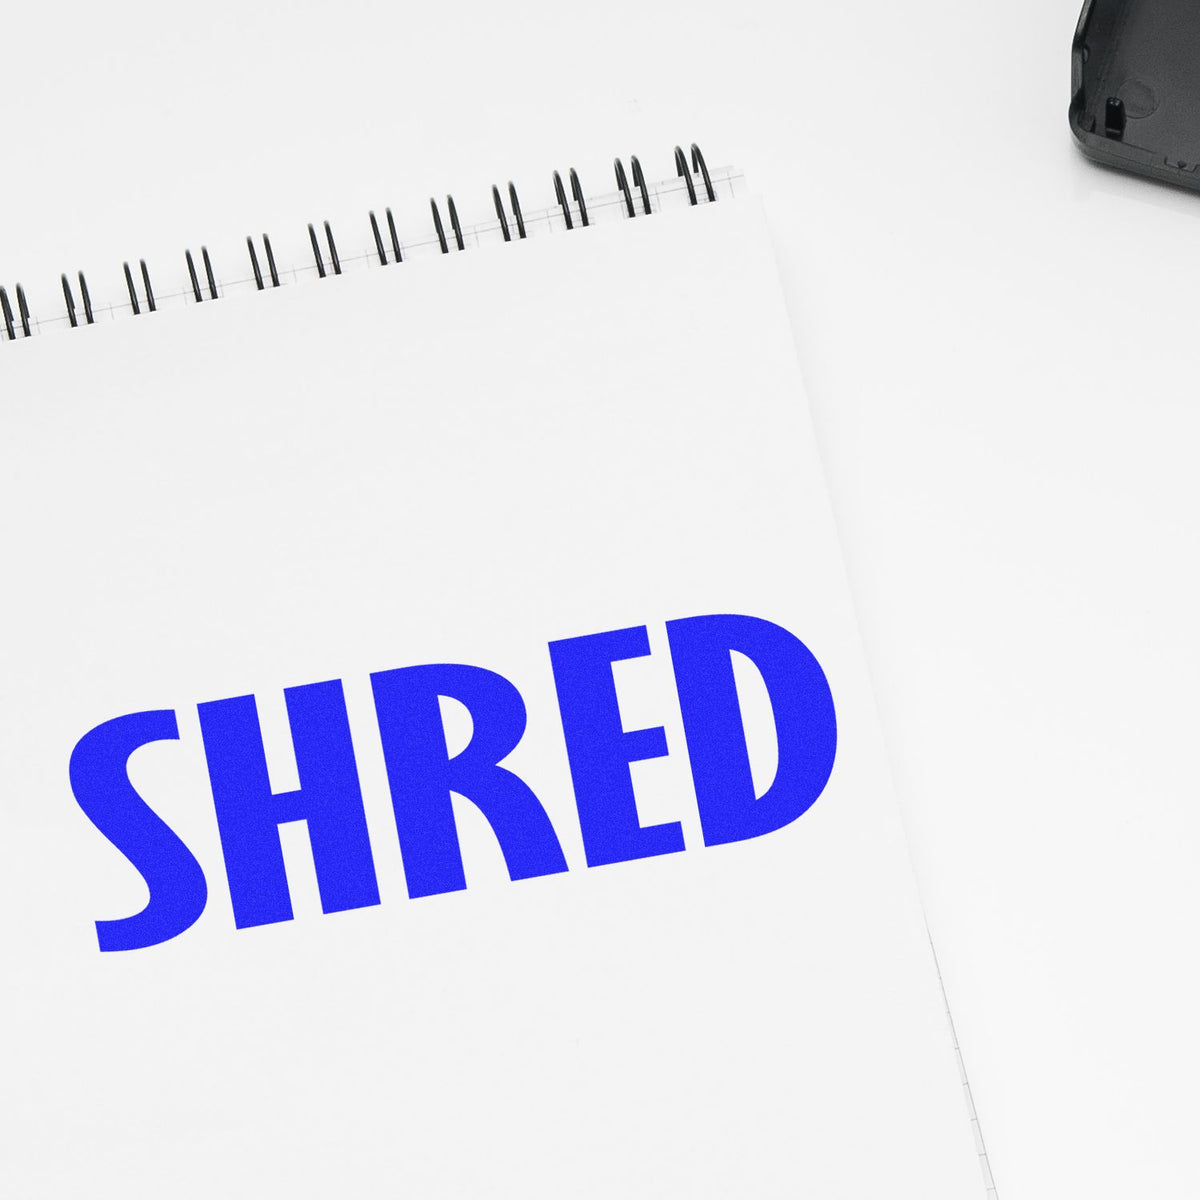 Large Pre-Inked Shred Stamp In Use Photo